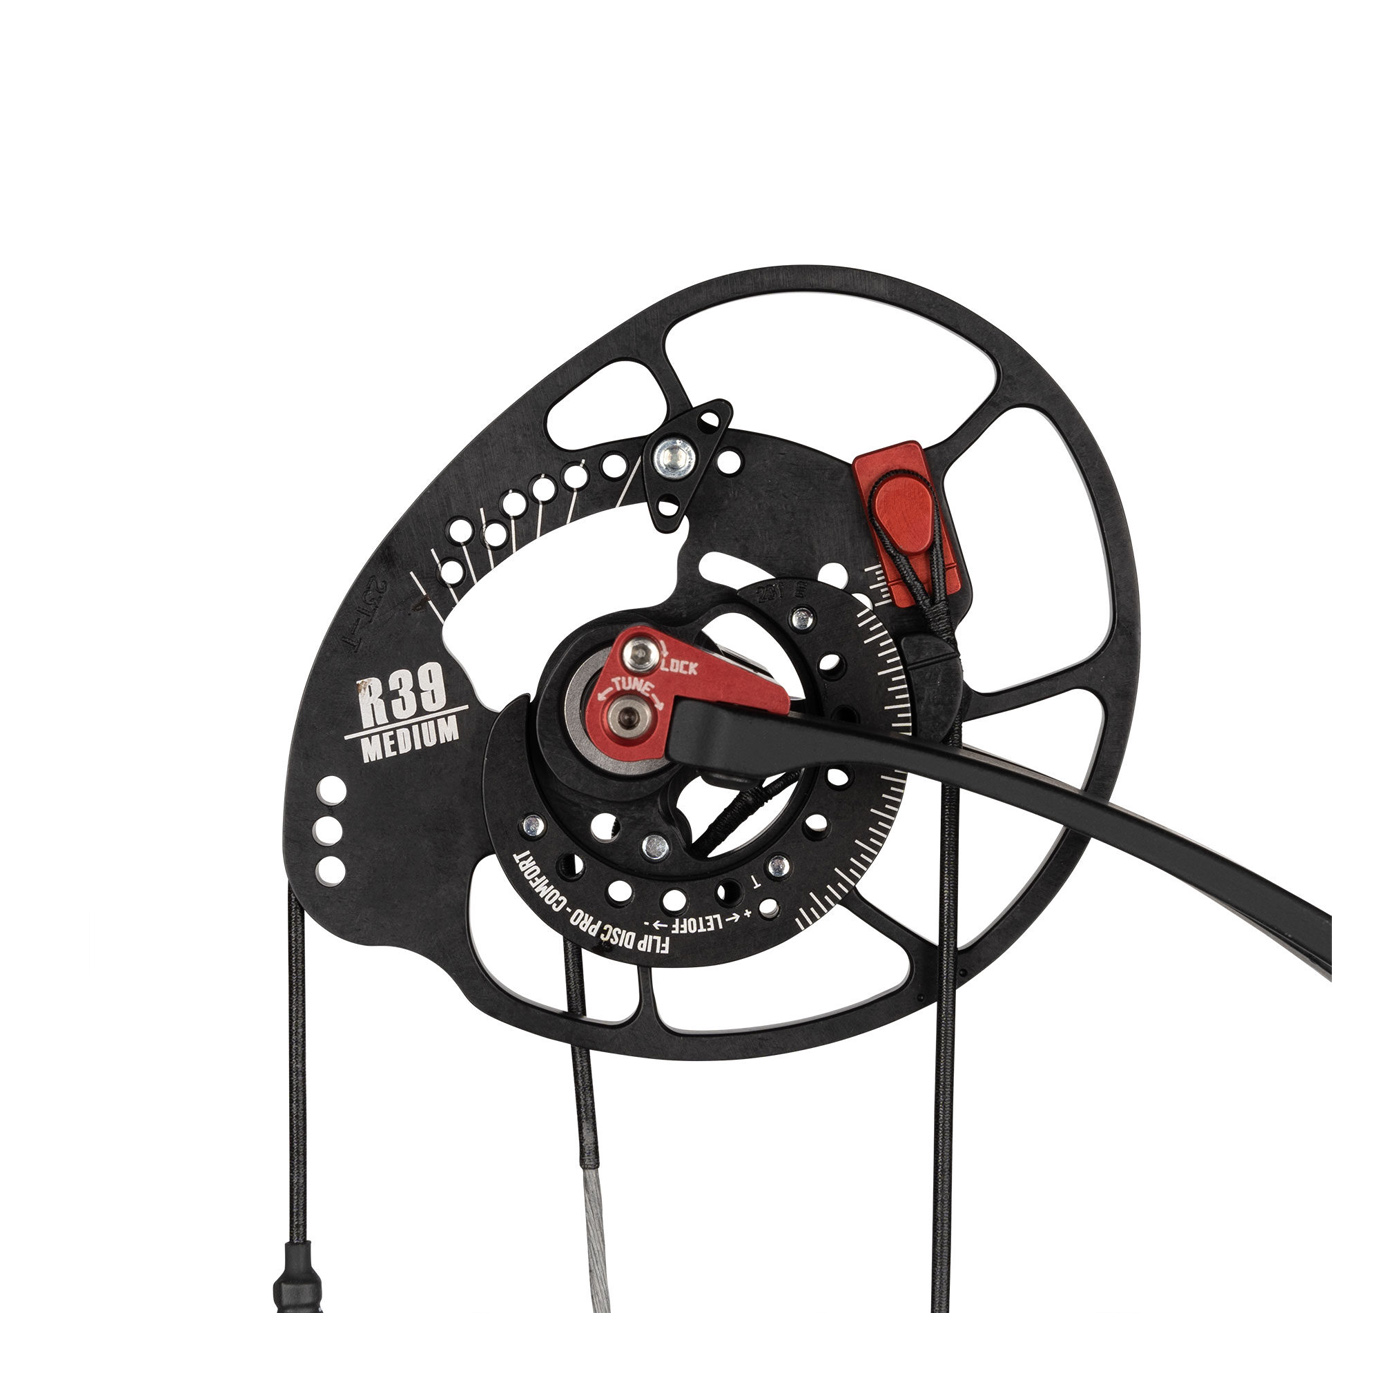 Bowtech Reckoning 39 Gen 2 Long Draw Compound Bow